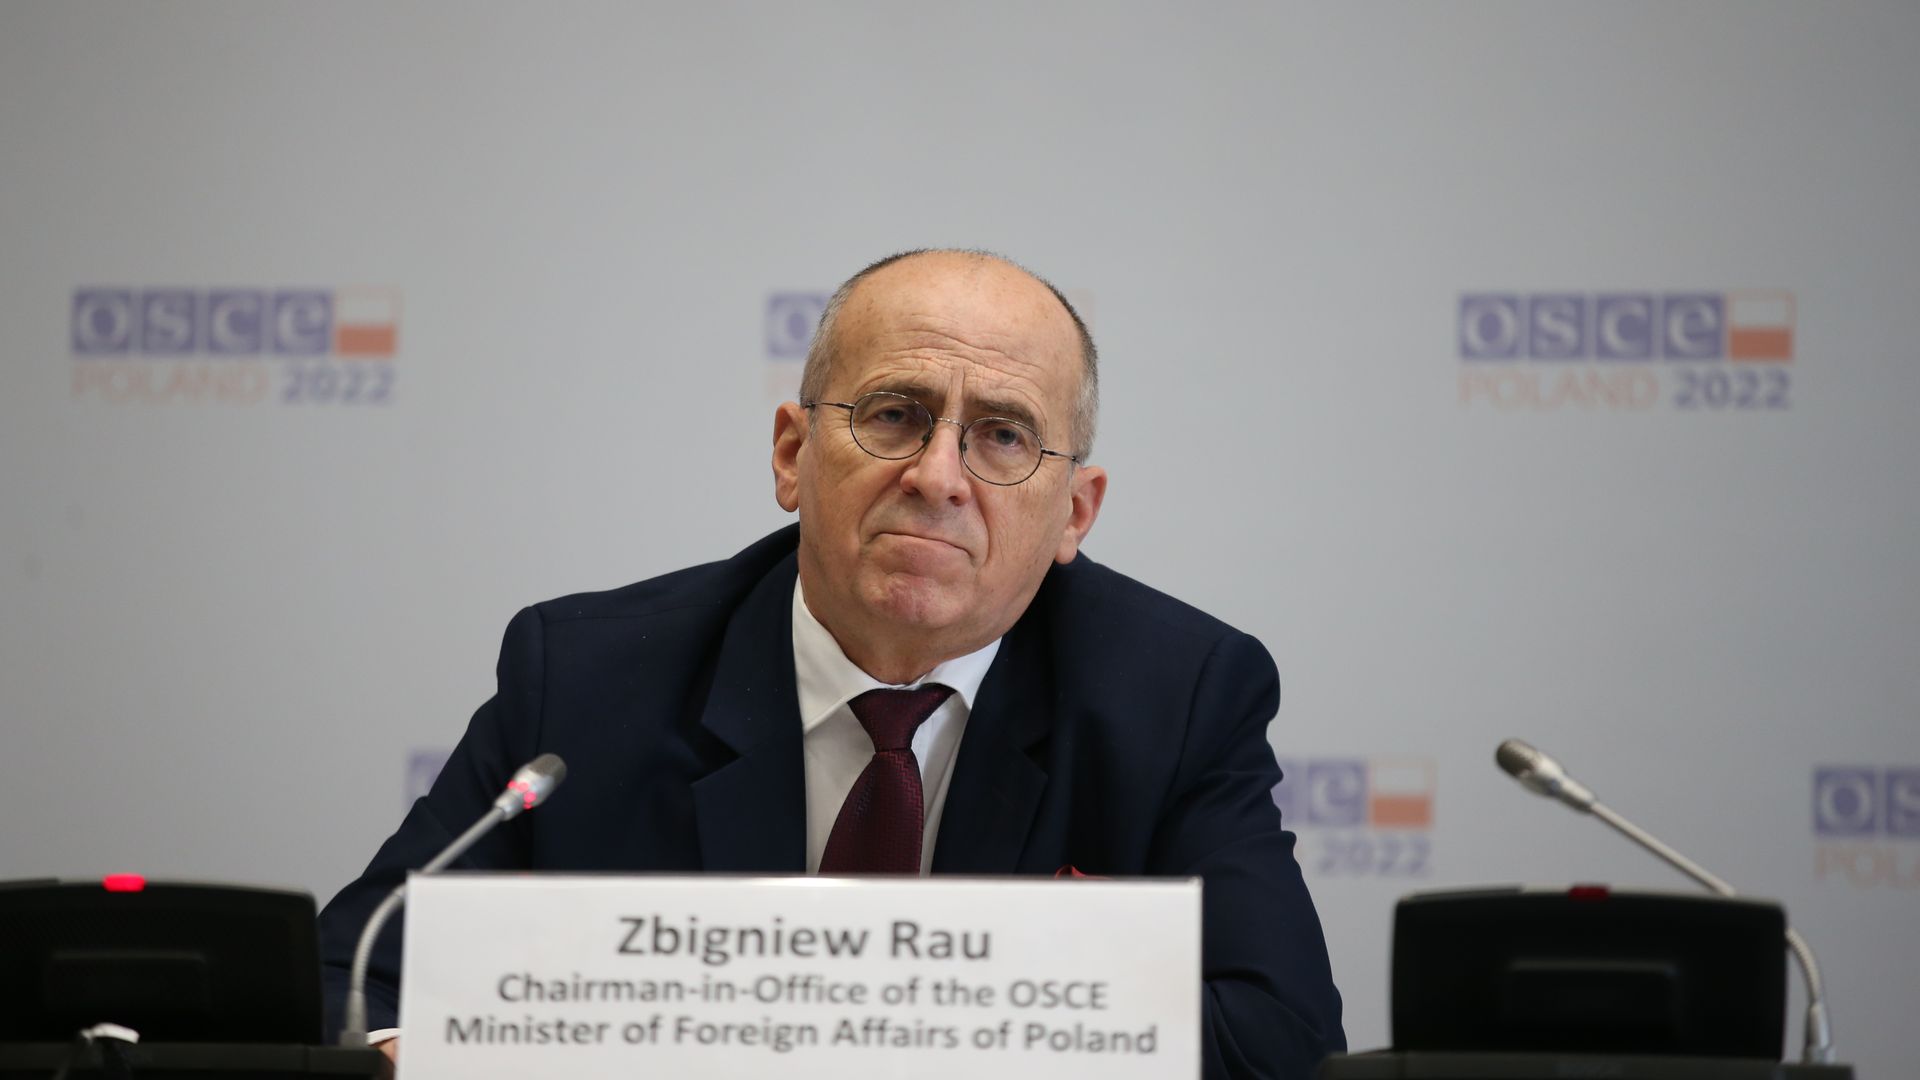 OSCE Chairman-in-Office Zbigniew Rau is seen addressing reporters.